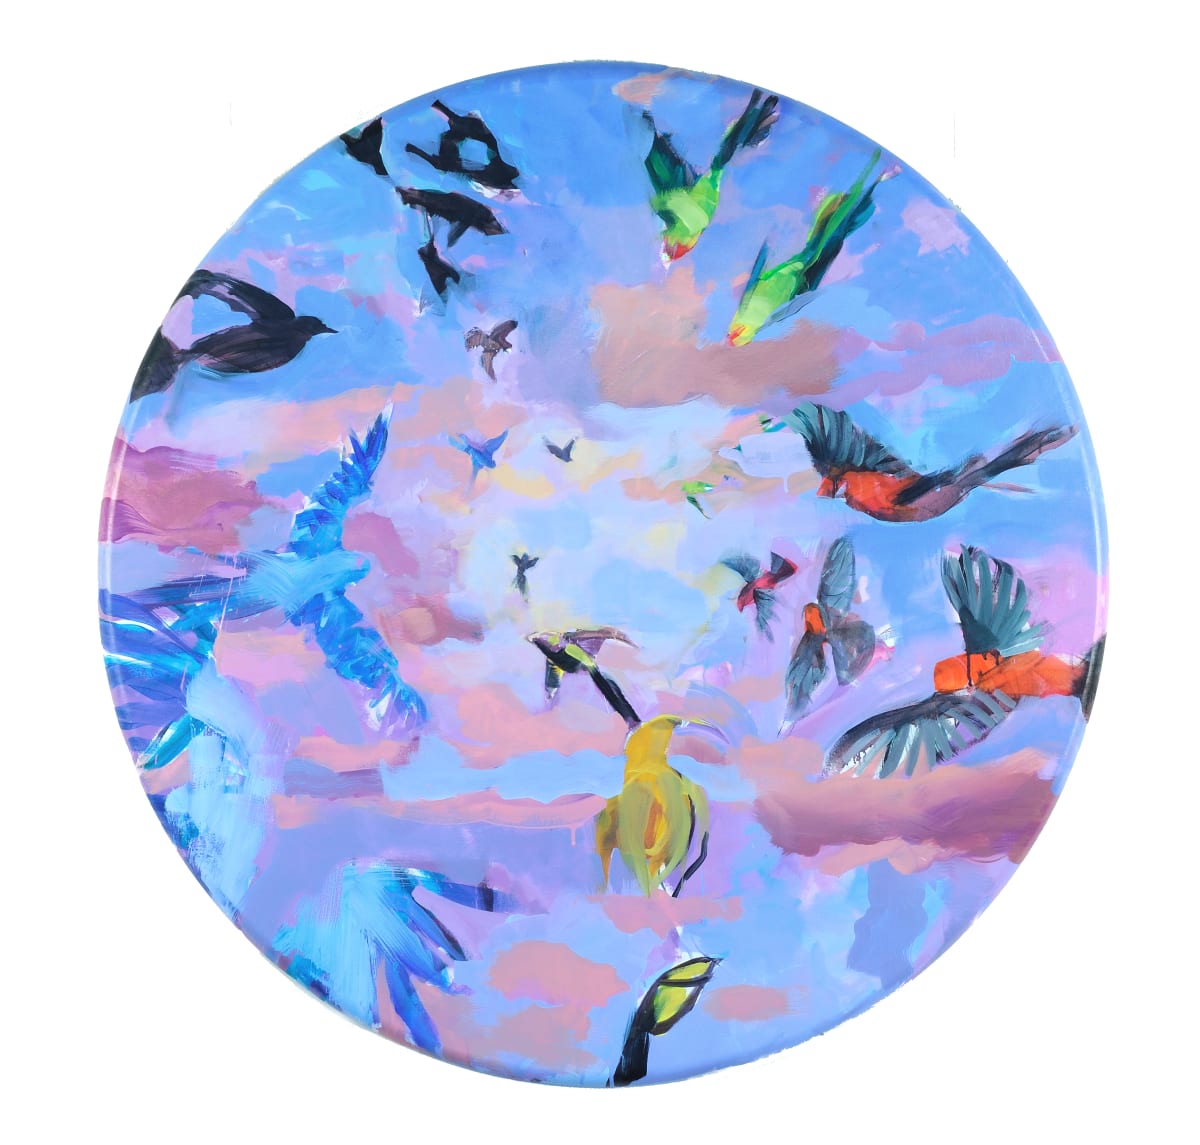 Out of This World by Sally Kauffman  Image: Magnificent frescoed ceilings and spring murmurations of starlings inspired my portrayals of the extinct Carolina Parakeet, Akialoa, Vermillion Flycatcher, Mysterious Starling and majestic Spix Macaw.